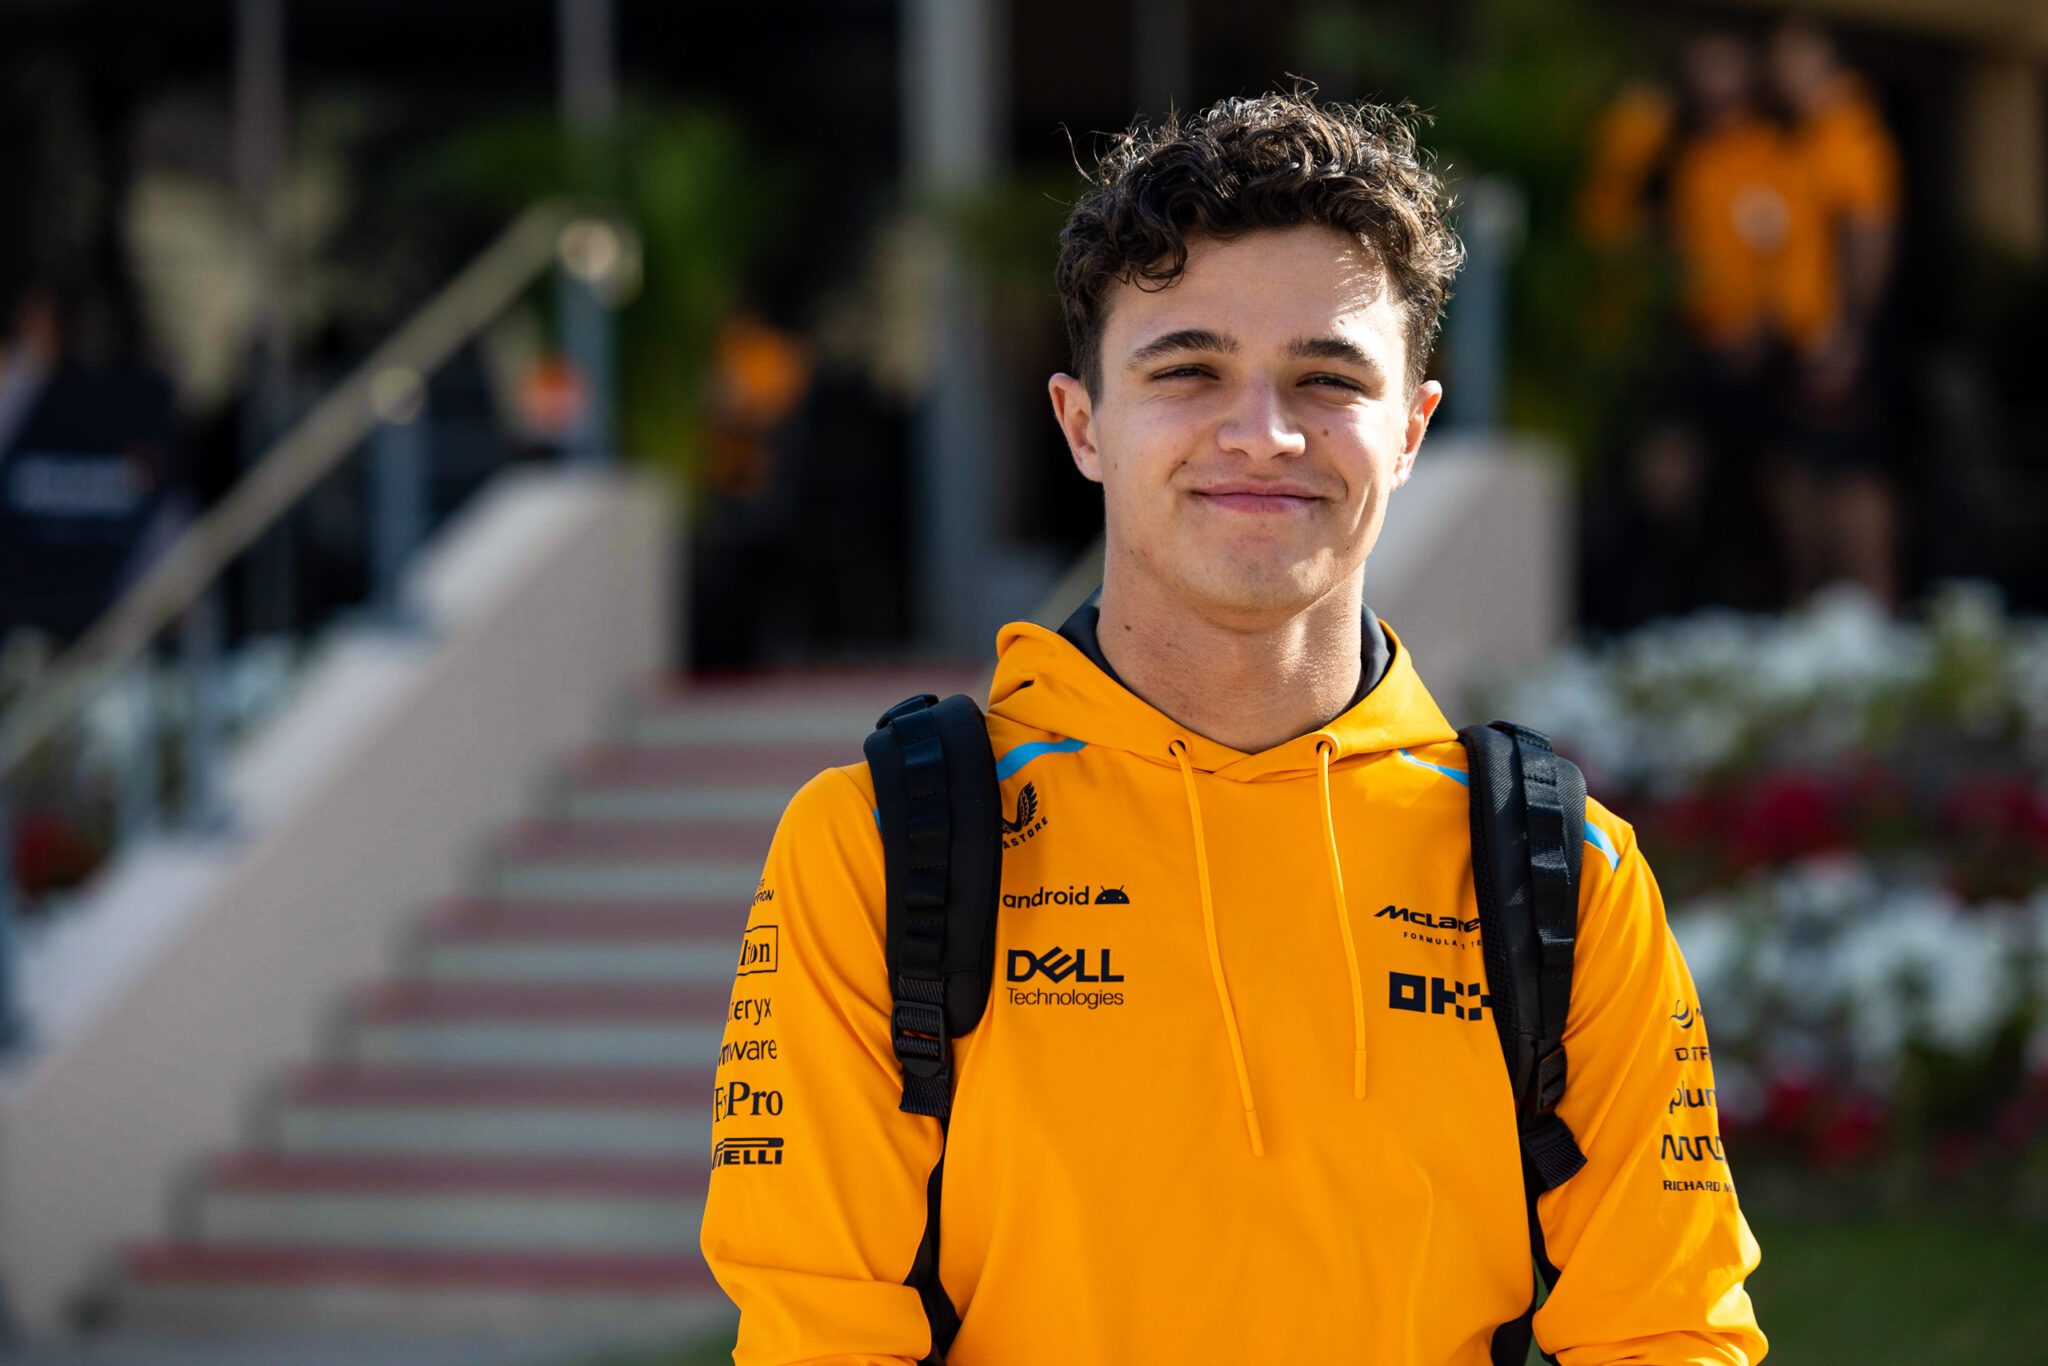 How Tall is Lando Norris